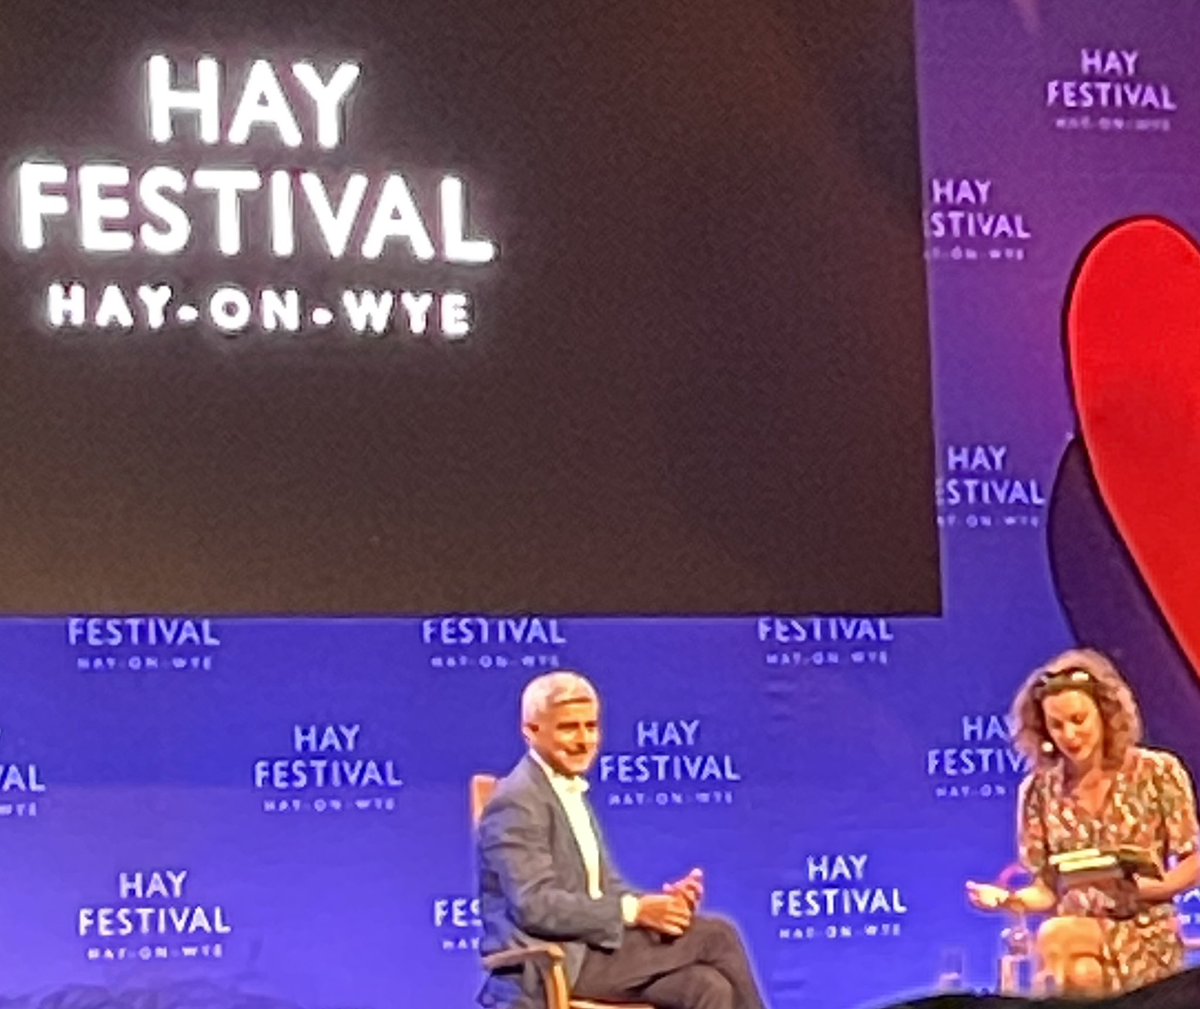 Great to hear from @SadiqKhan earlier who spoke passionately about tackling the climate emergency and the importance of building coalitions to win the argument on environment. #HayFestival2023